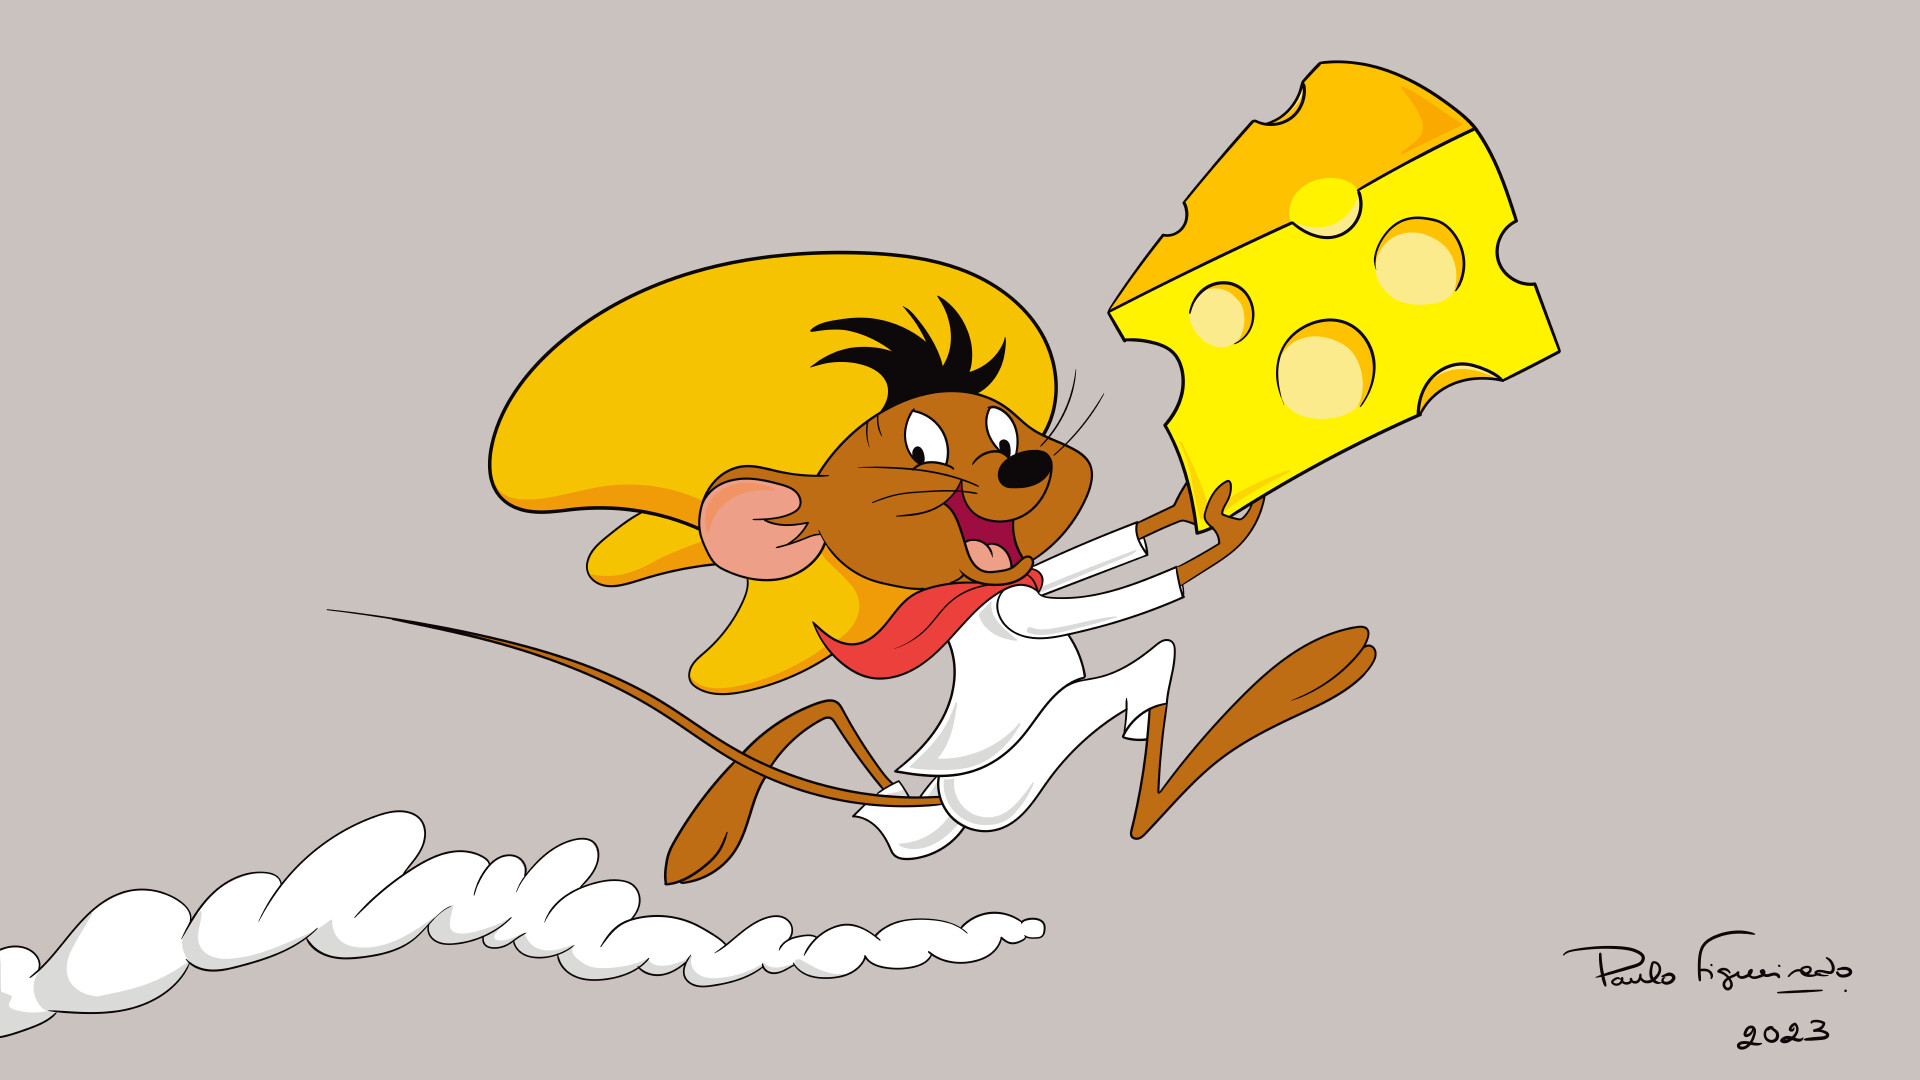 Warner Bros BUGS BUNNY SHOW Animation Drawing SPEEDY GONZALES in